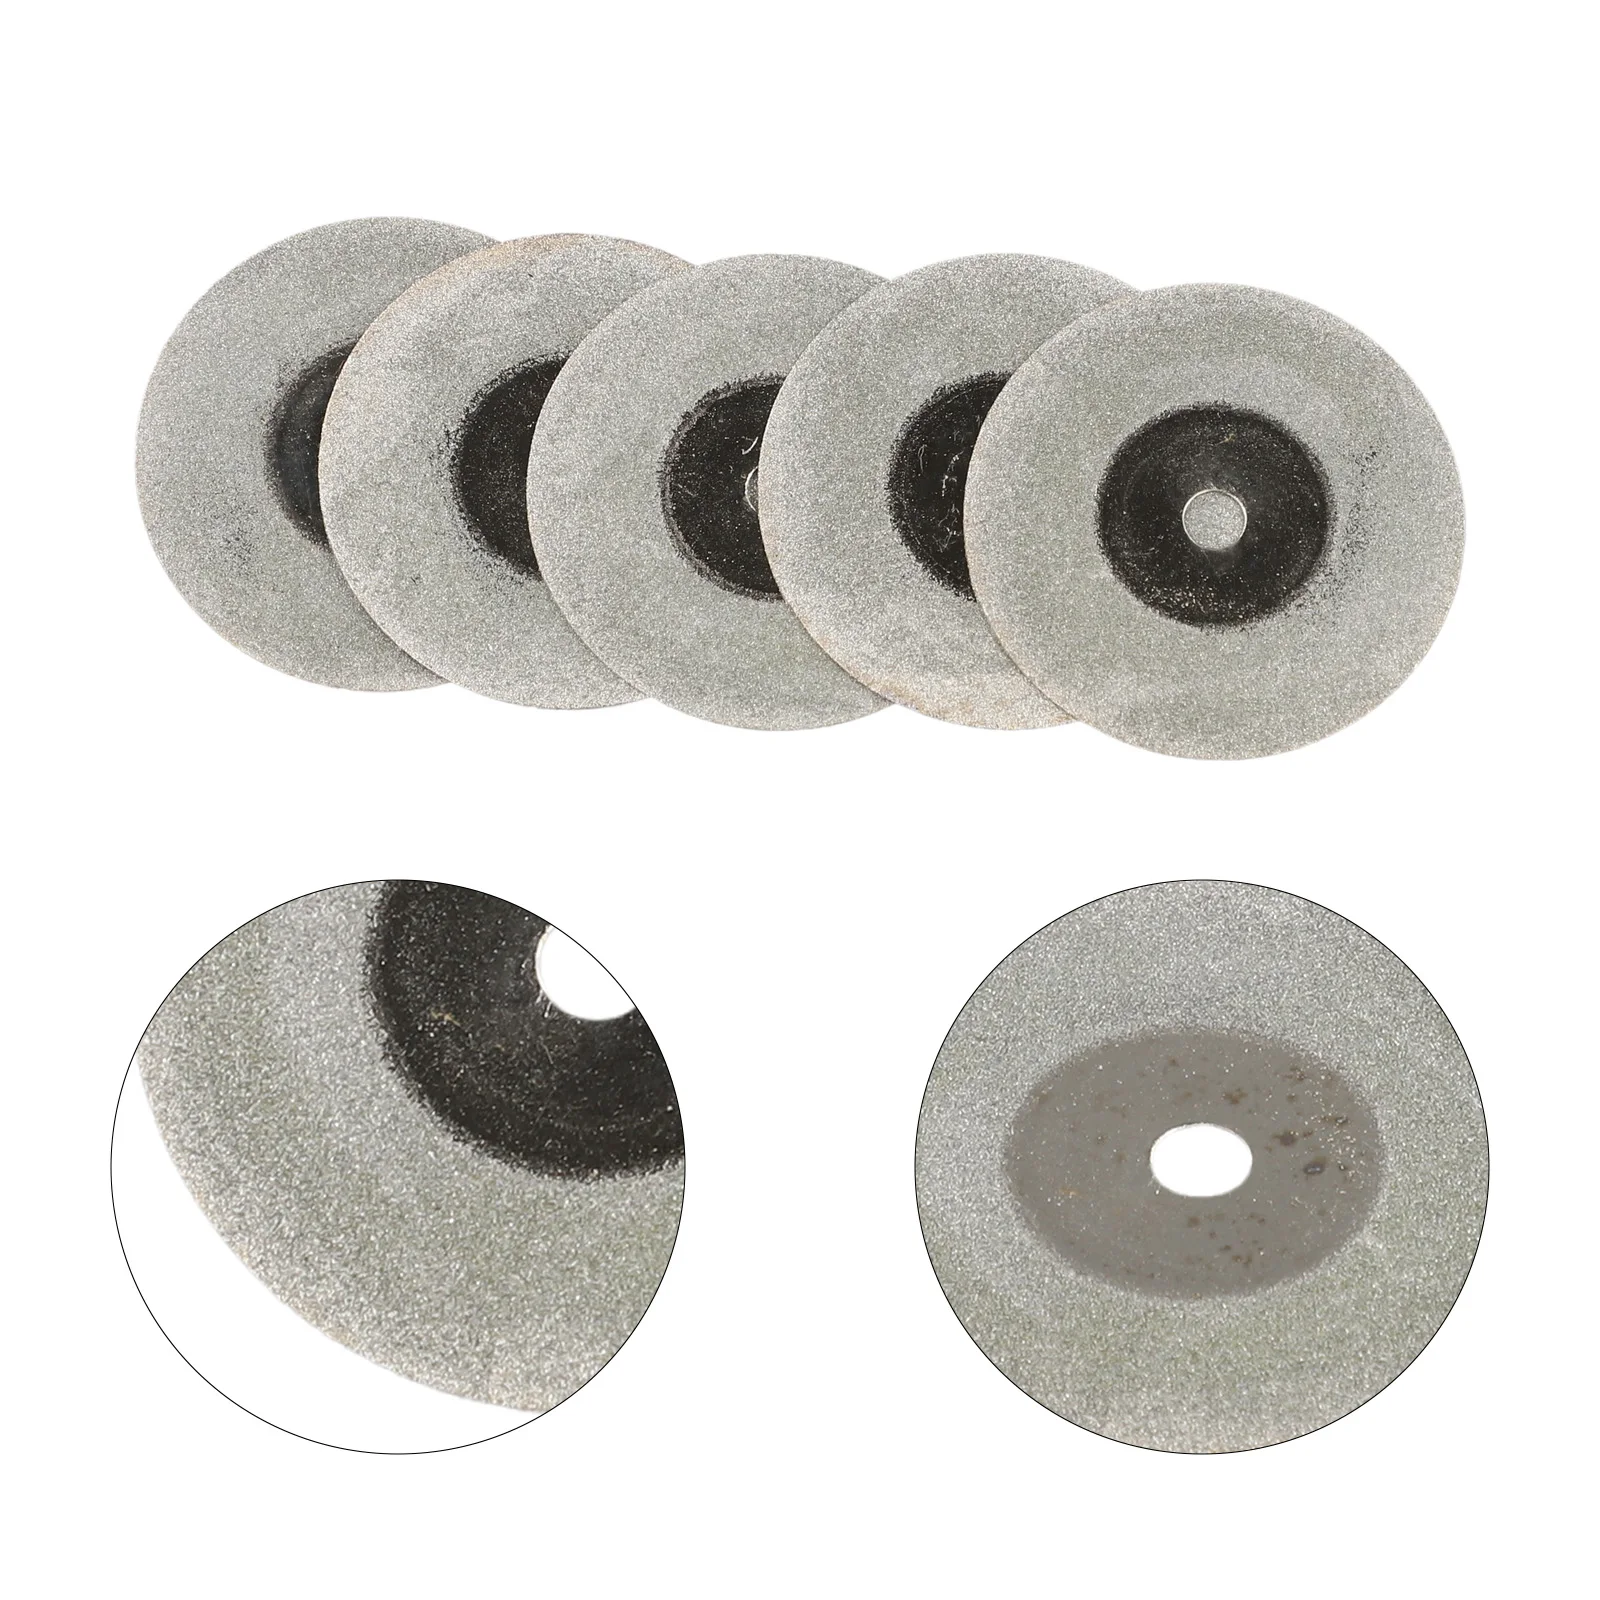 5pcs Cutting Discs 60mm Diamond Saw Blade Cutting Disc Glass Tiles Cutting Blades​ ​power Tools Replacement Accessories 100pcs razor blades safety scraper glue knife glass cleaner replacement carbon steel blade ceramic car labels remover e13